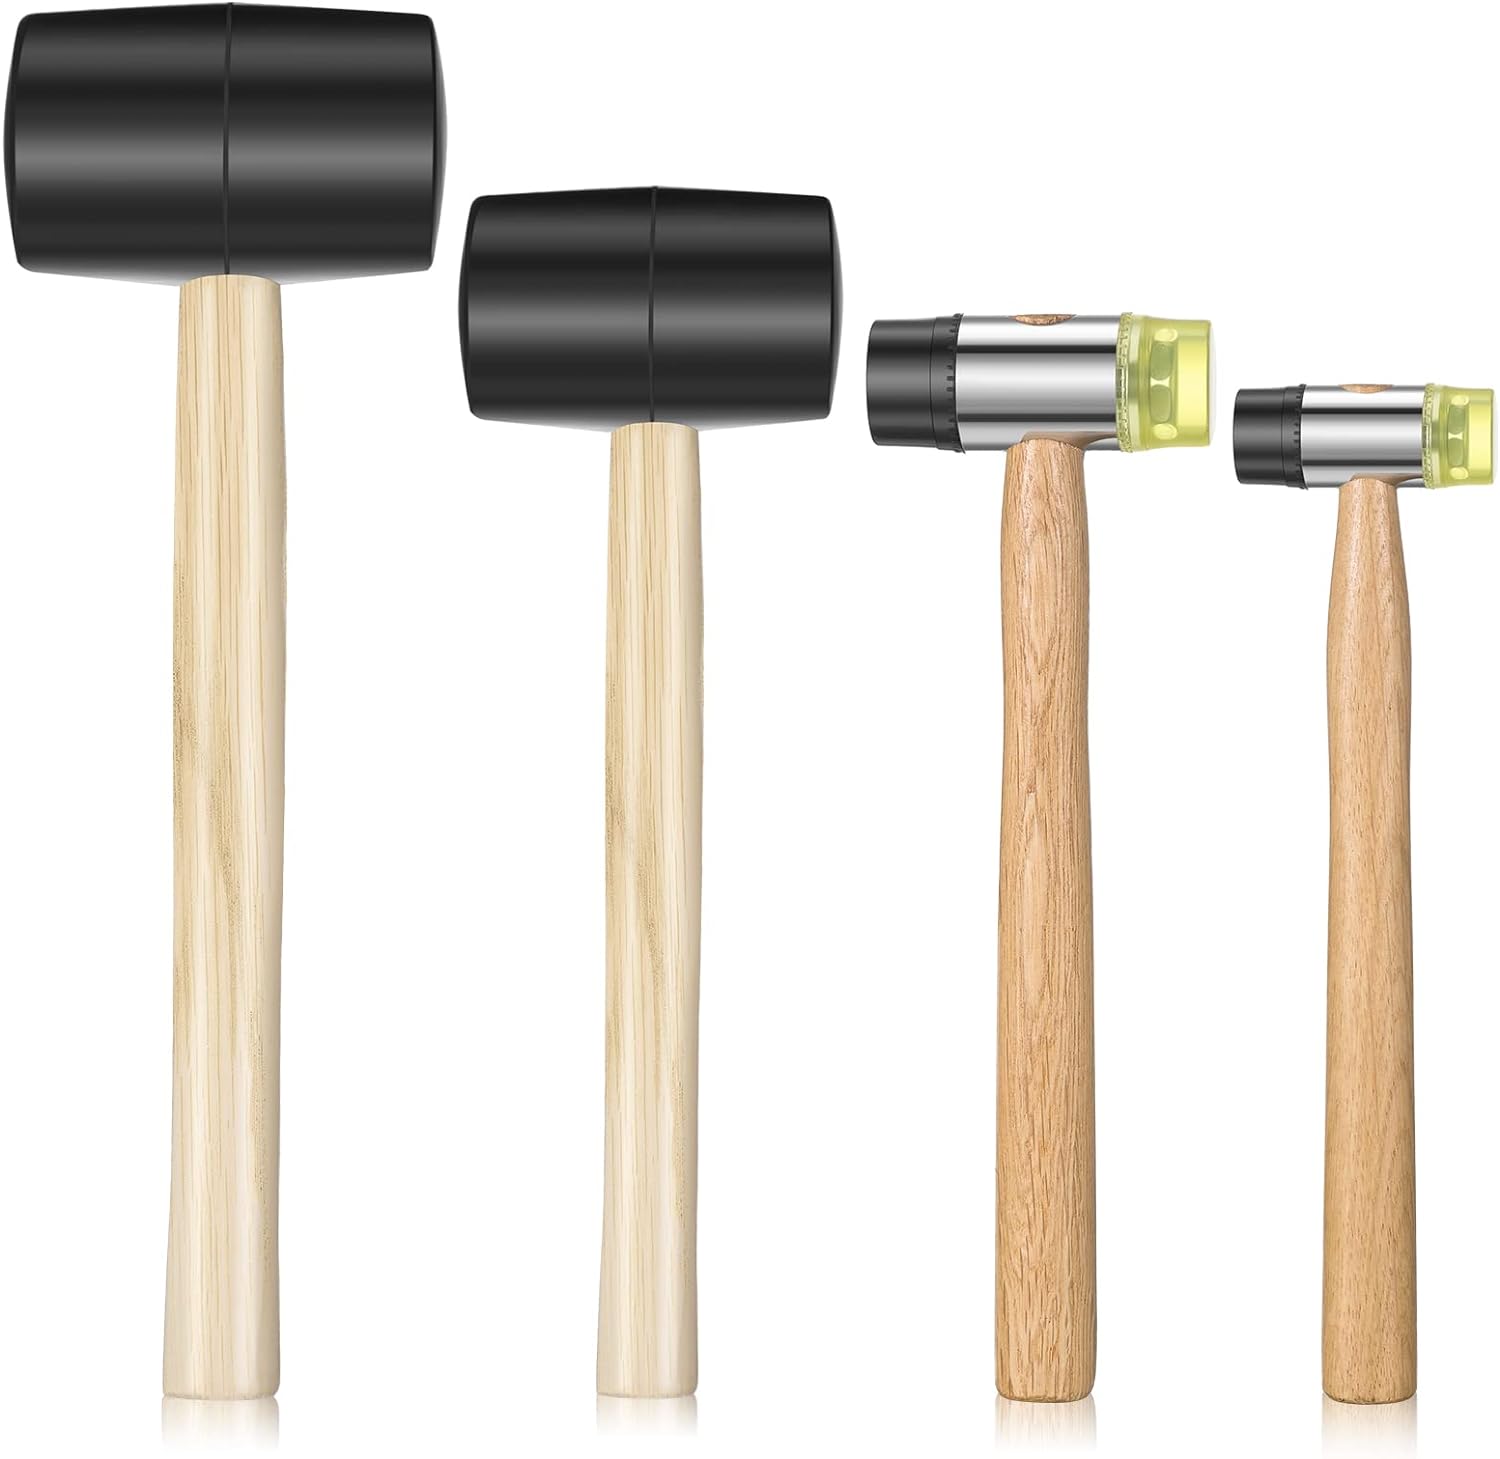 LEIFIDE 4 Pieces 16 oz/ 24 oz Rubber Mallet Hammer and 25 mm/ 35 mm Double Face Hammer, Rubber Hammer Soft Hammer Wood Handle Hammer fo